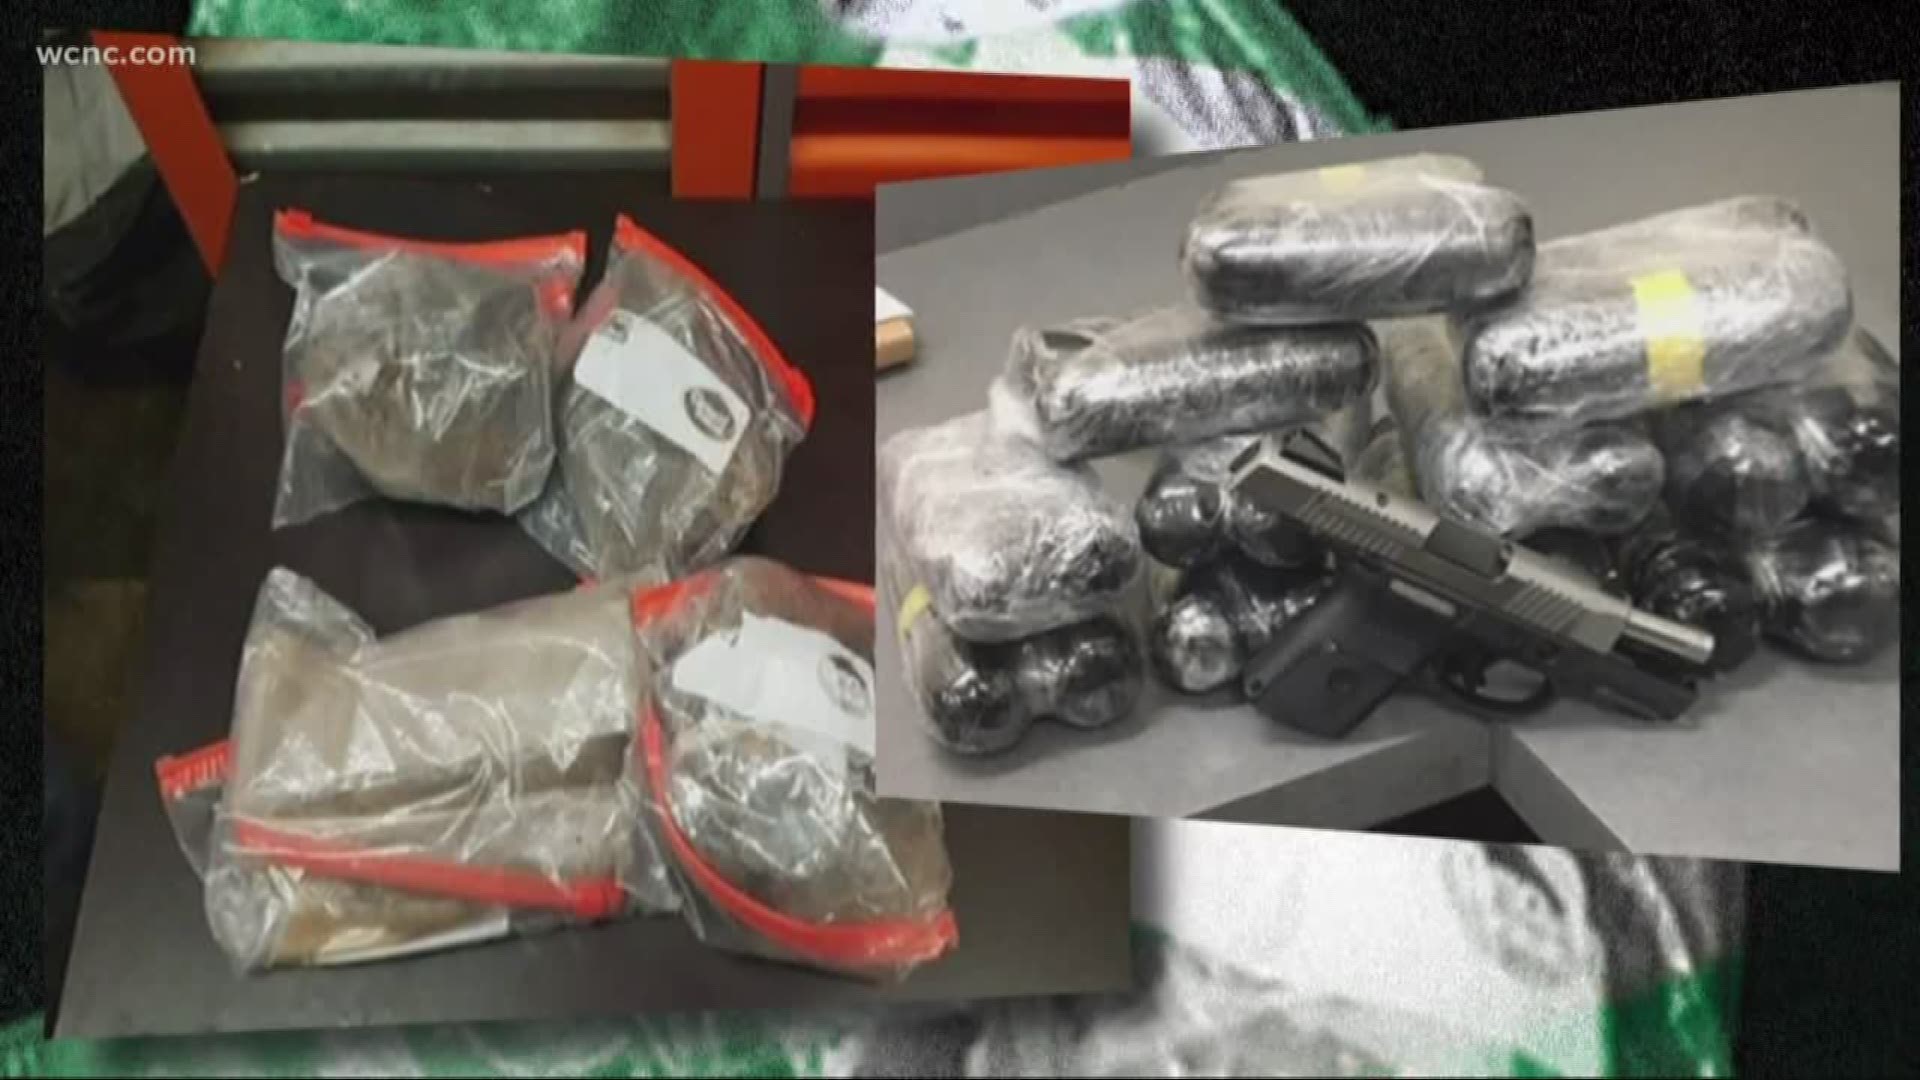 DEA agents say millions of dollars in meth and other drugs are running up and down Charlotte-area's interstates, trafficked by dangerous drug kingpins from Mexico.